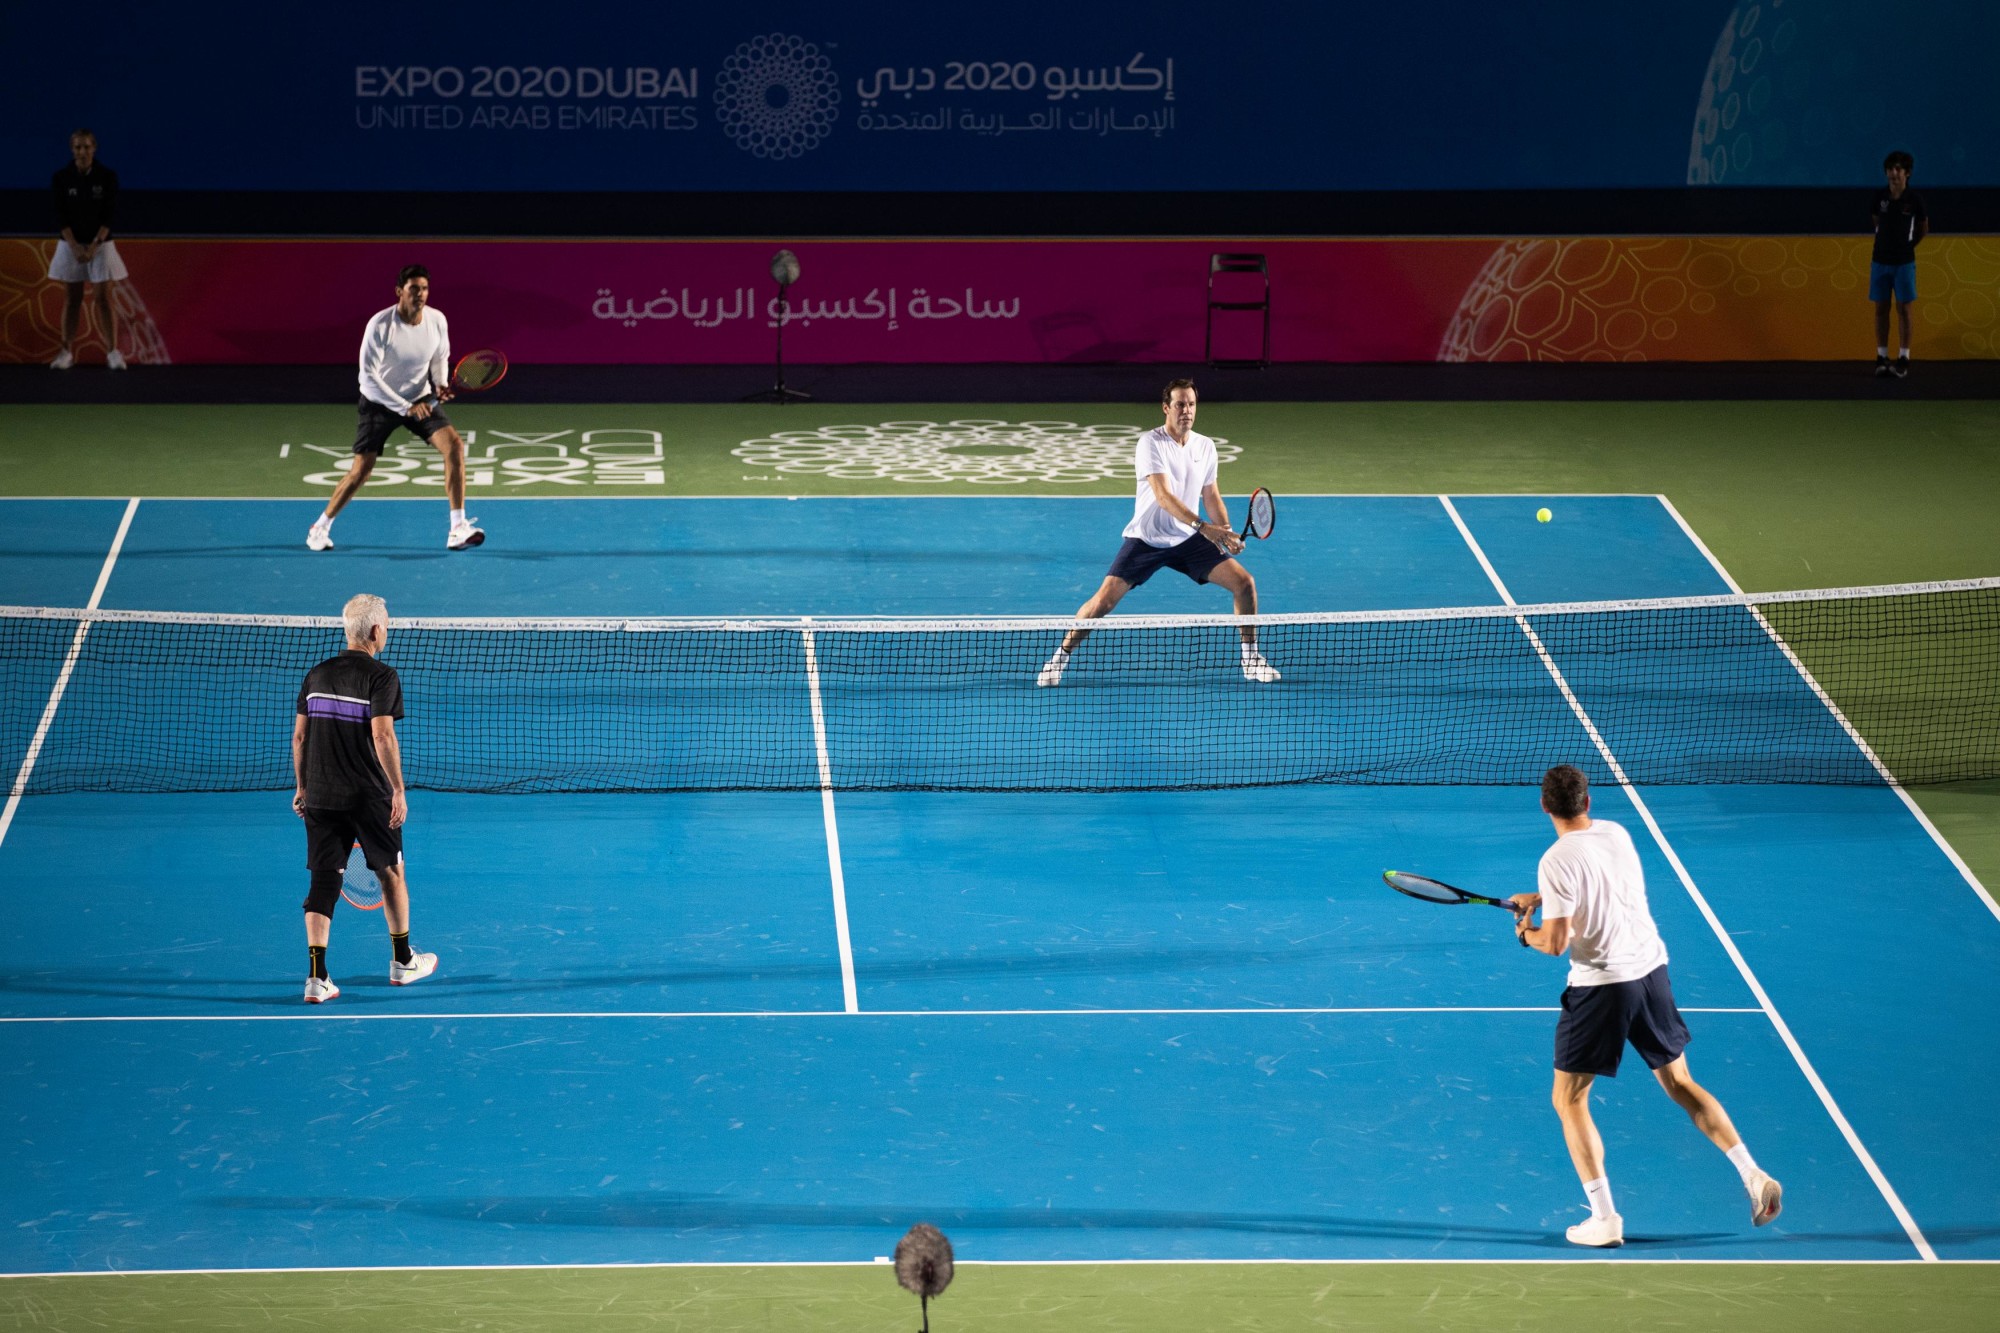 Tennis legends Richard Krajicek (BR) and John McEnroe (BL) against Mark Philippoussis (TL) and Greg Rusedski (TR) for the Men’s Doubles Exhibition Game during Expo 2020 Dubai Tennis Week at the Expo Sports Arena m52465